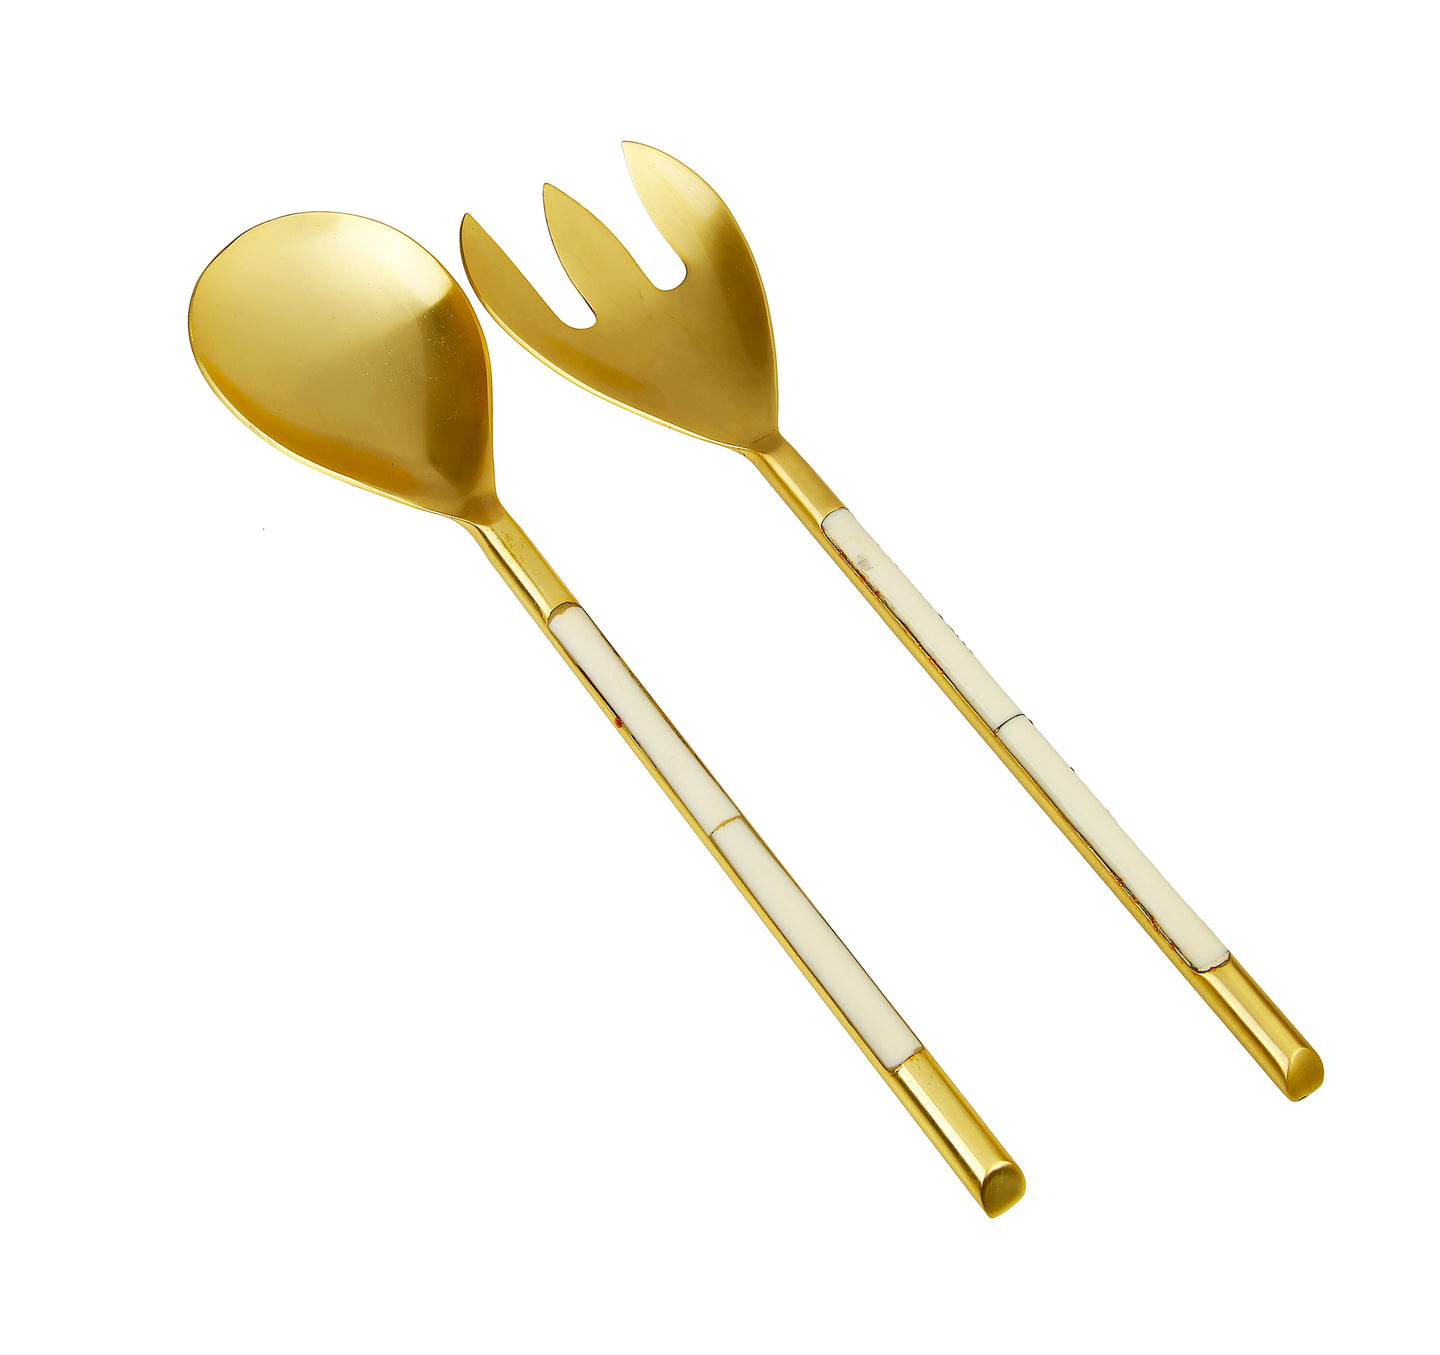 S/2 Gold Stainless Steel Salad Servers With White Handle